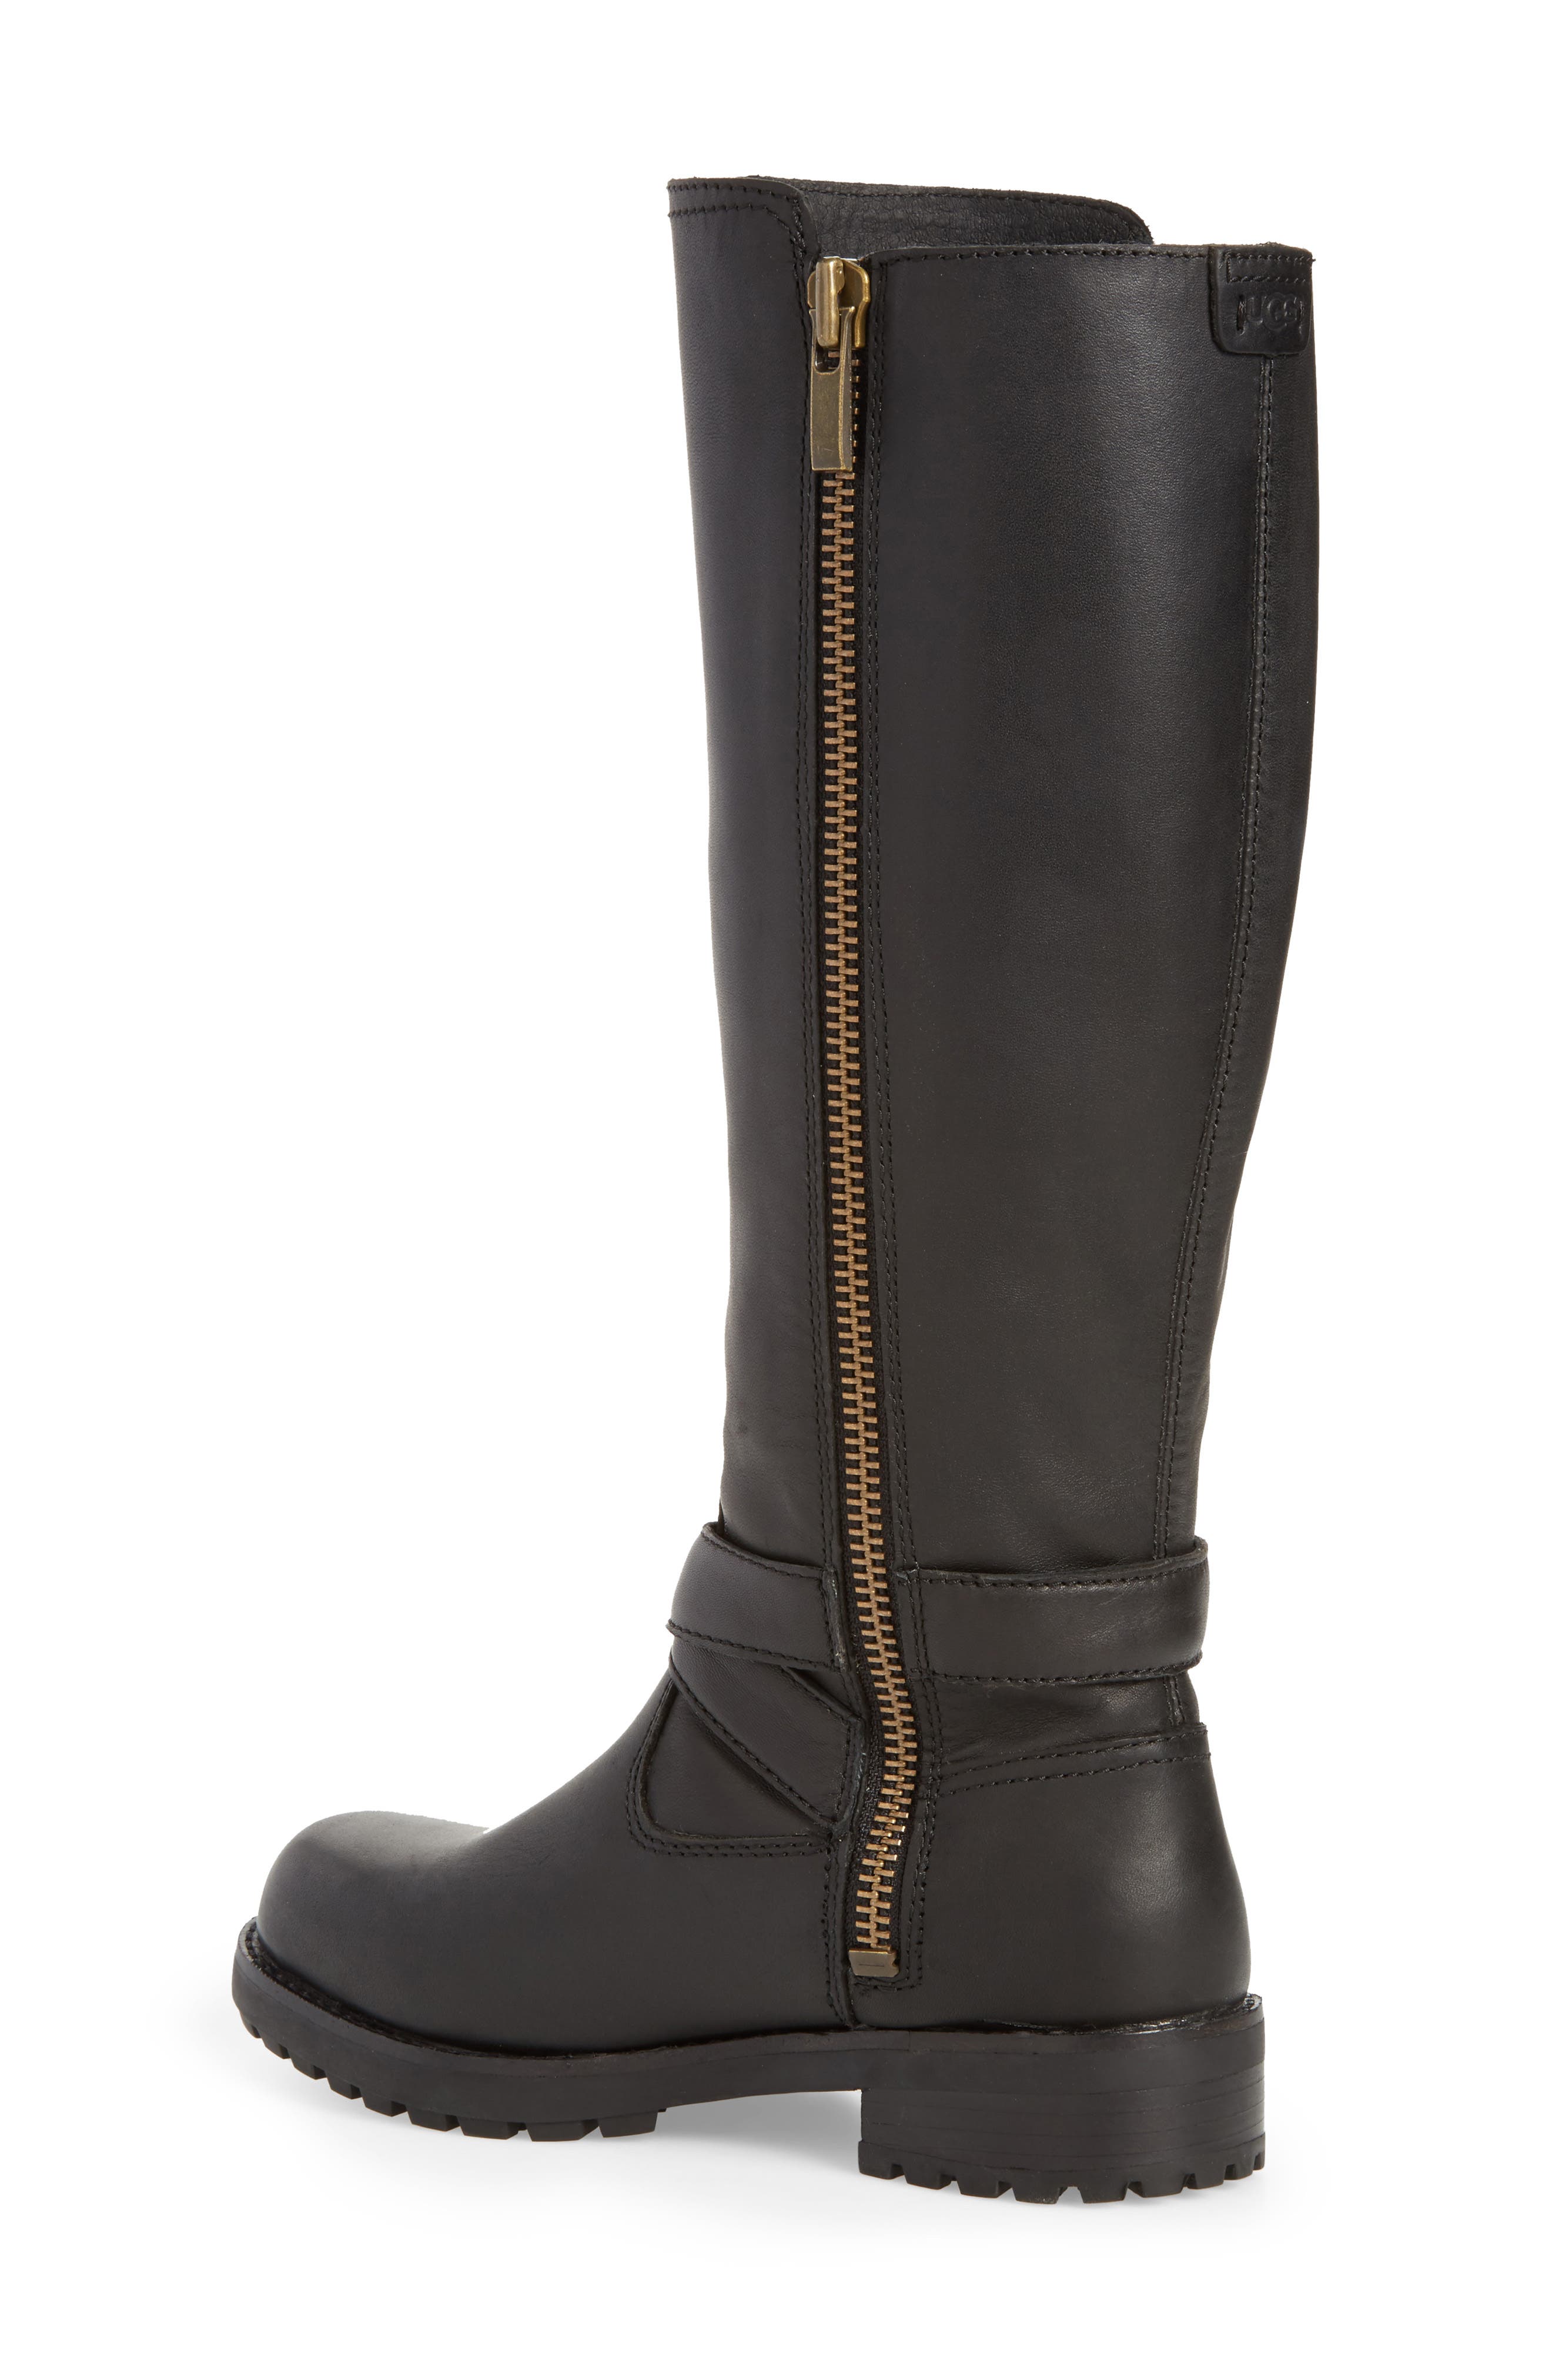 ugg riding boots nordstrom